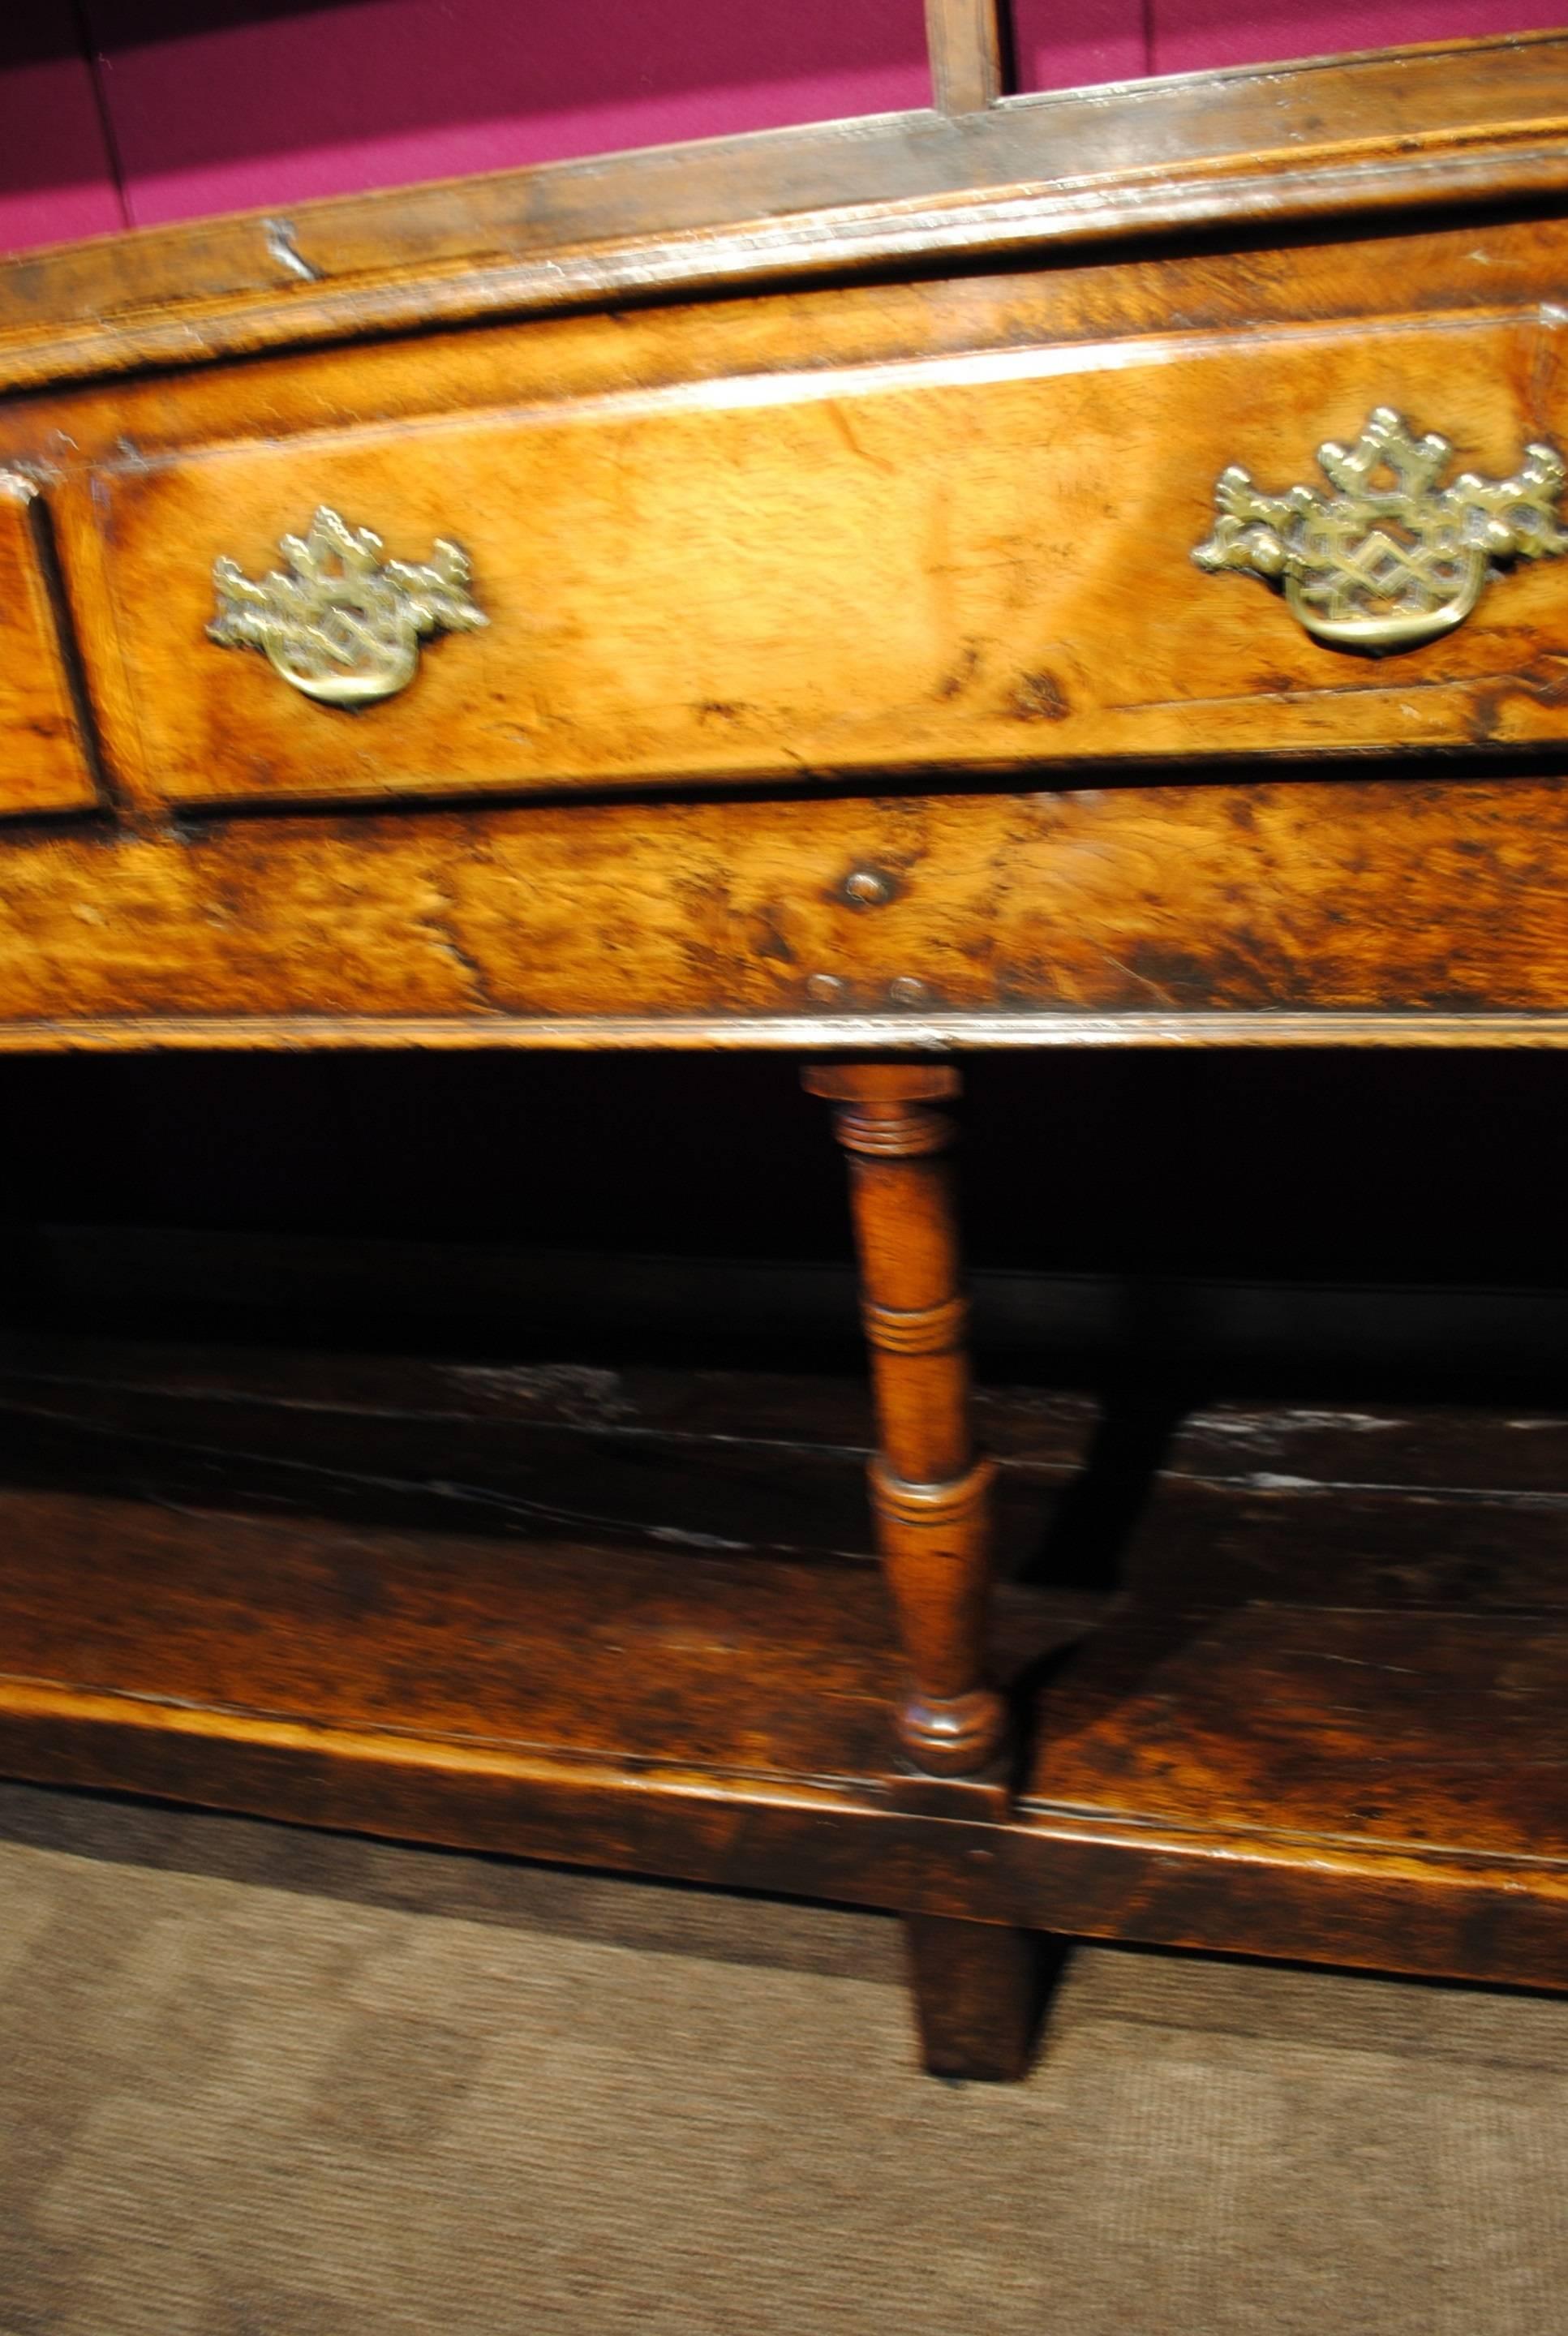 A good example of an 18th century dresser and original rack of fine mellow color and patina.